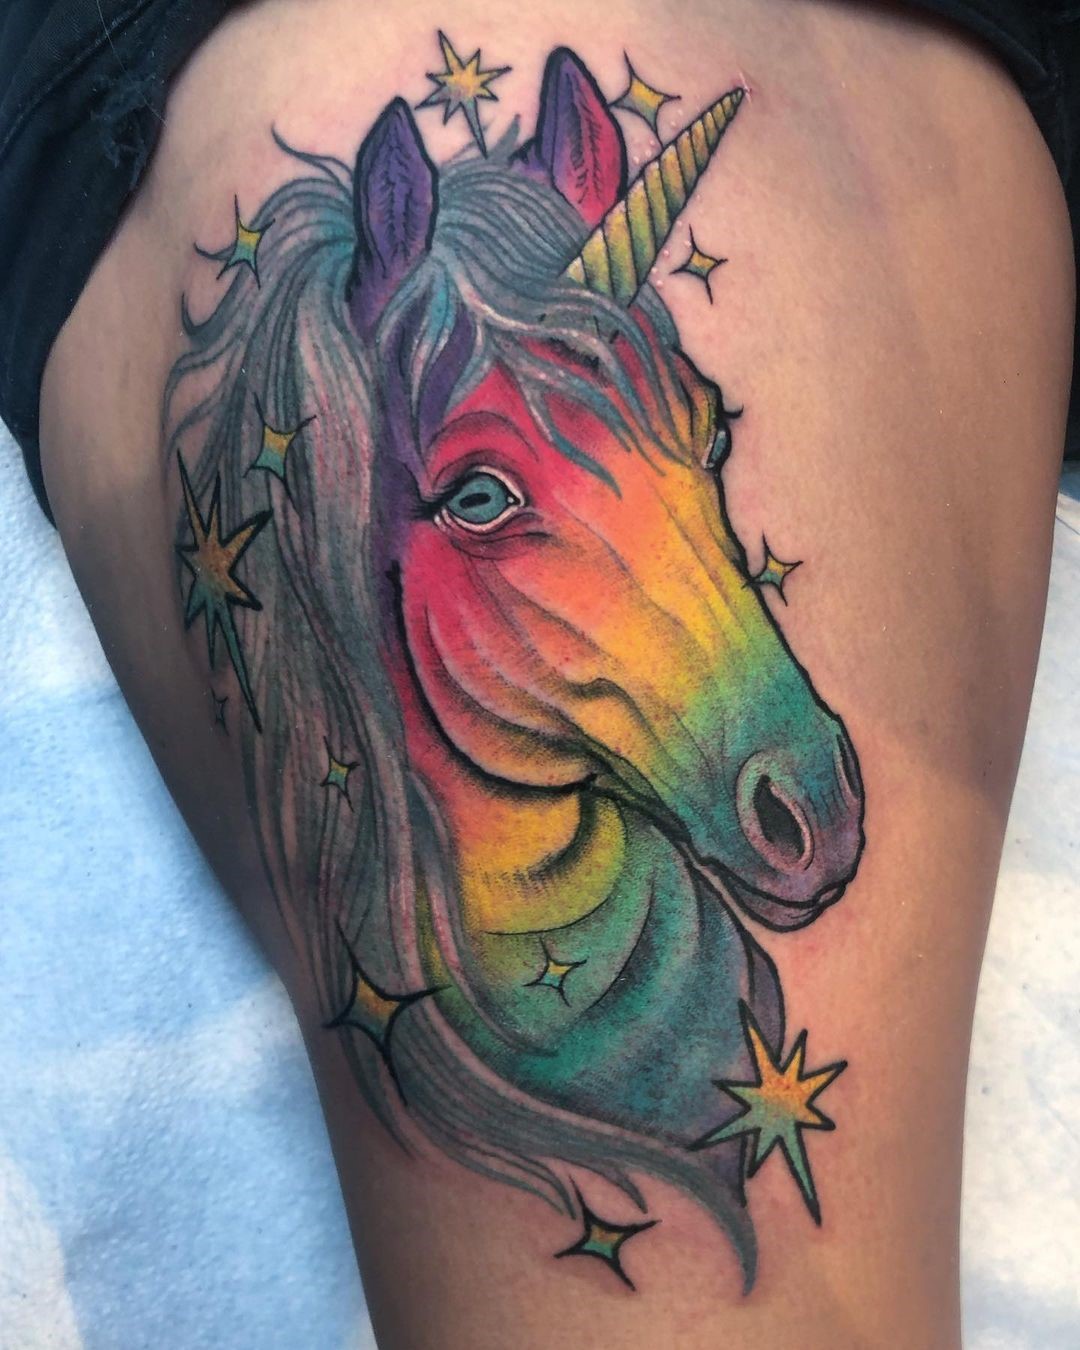 Unicorn tattoo by Sol Amstutz at Dreams Collide Tattoo in Lancaster, PA  #evamigtattoos #tattoo - Imageix